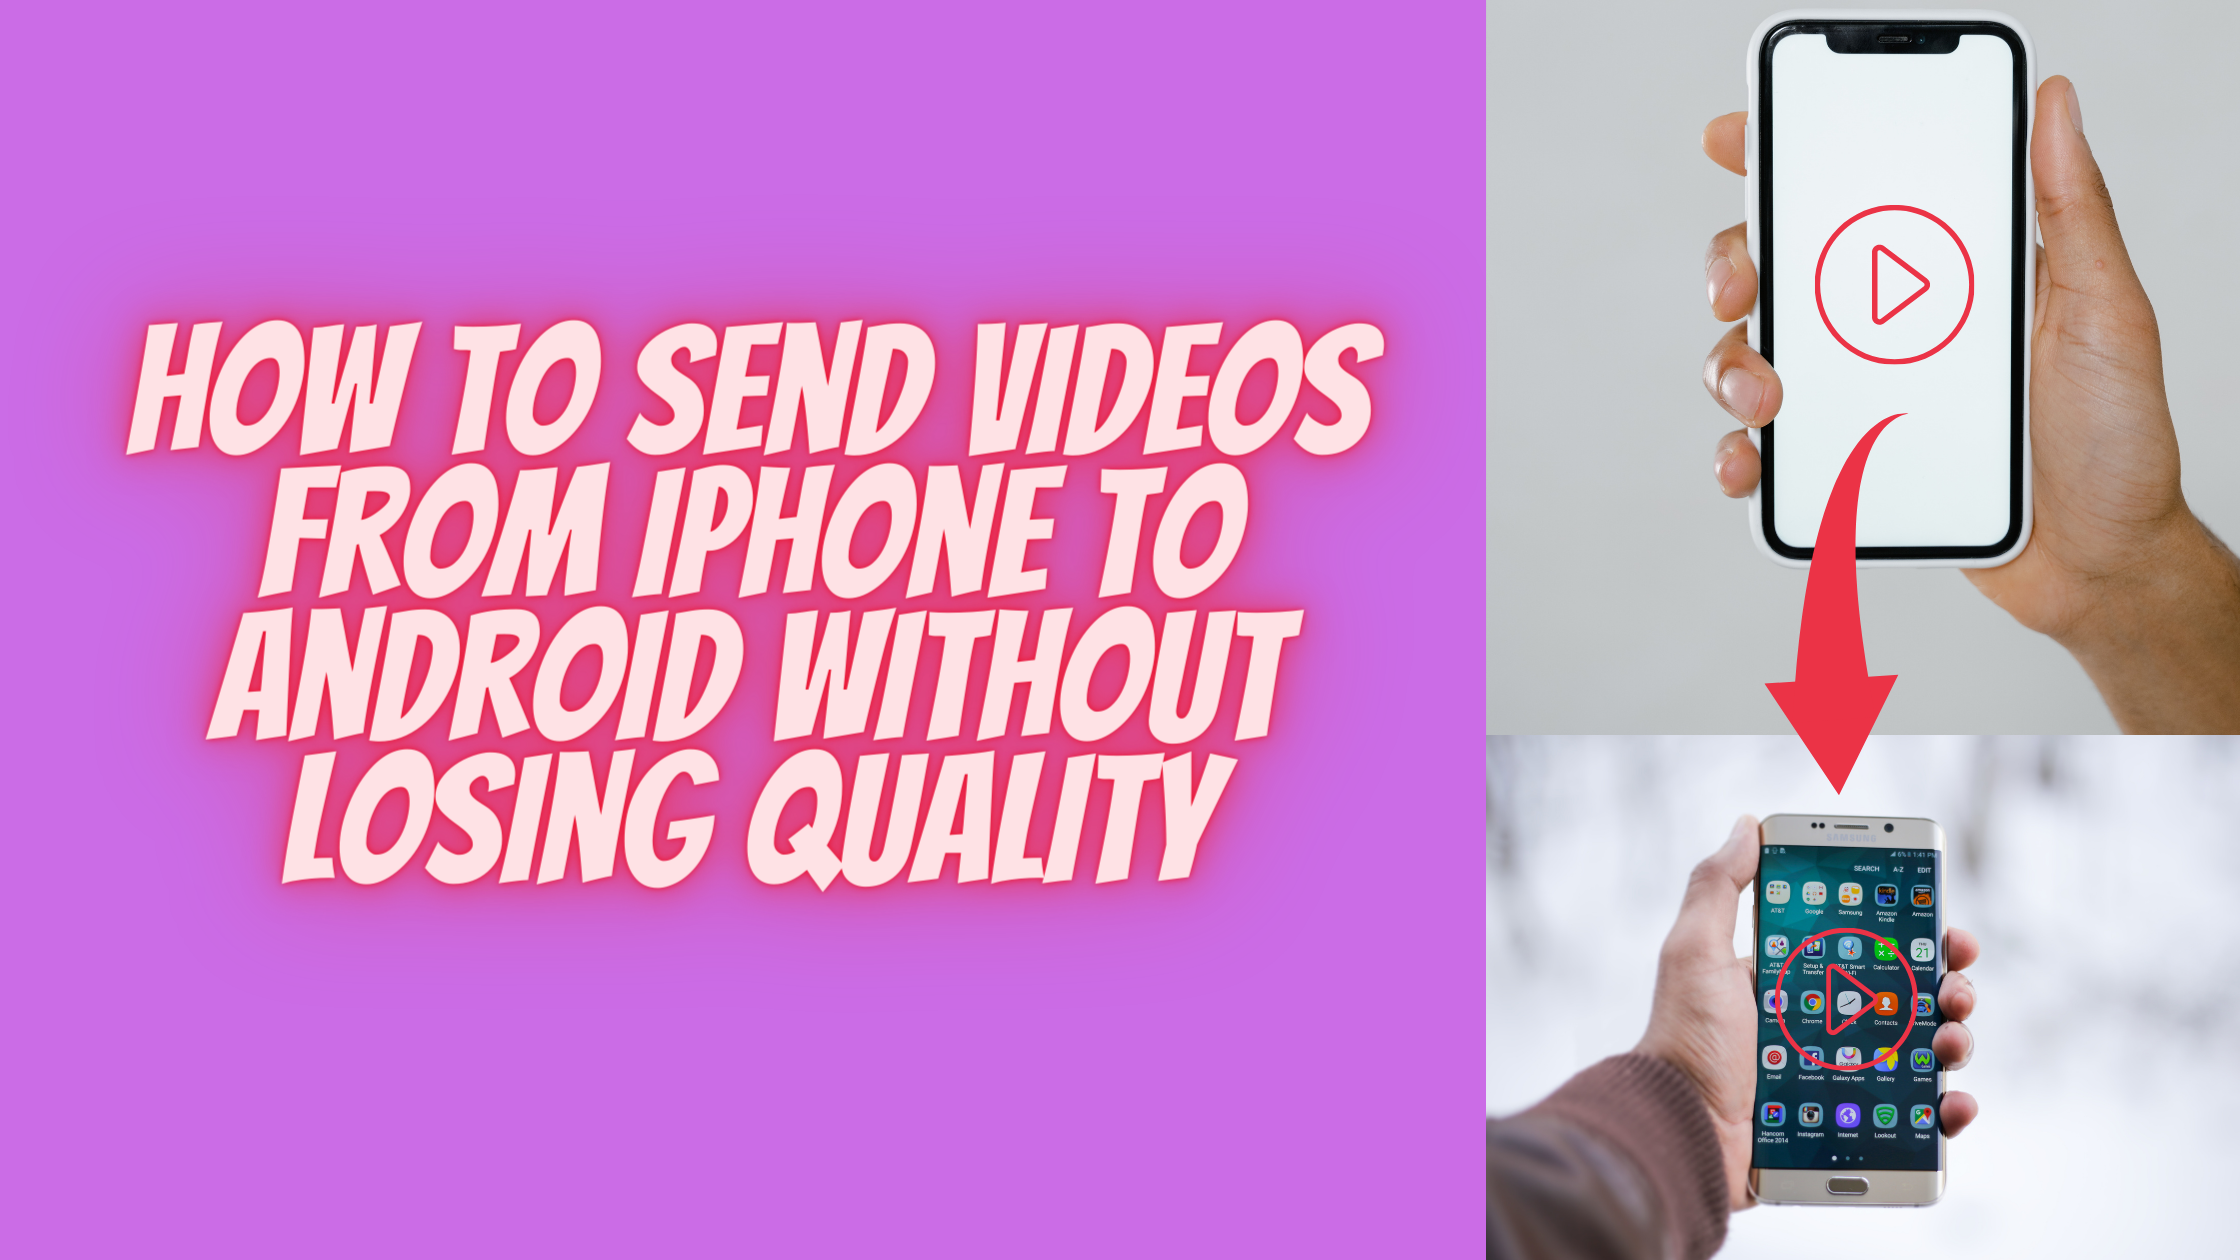 How To Send Videos From iPhone To Android Without Losing Quality